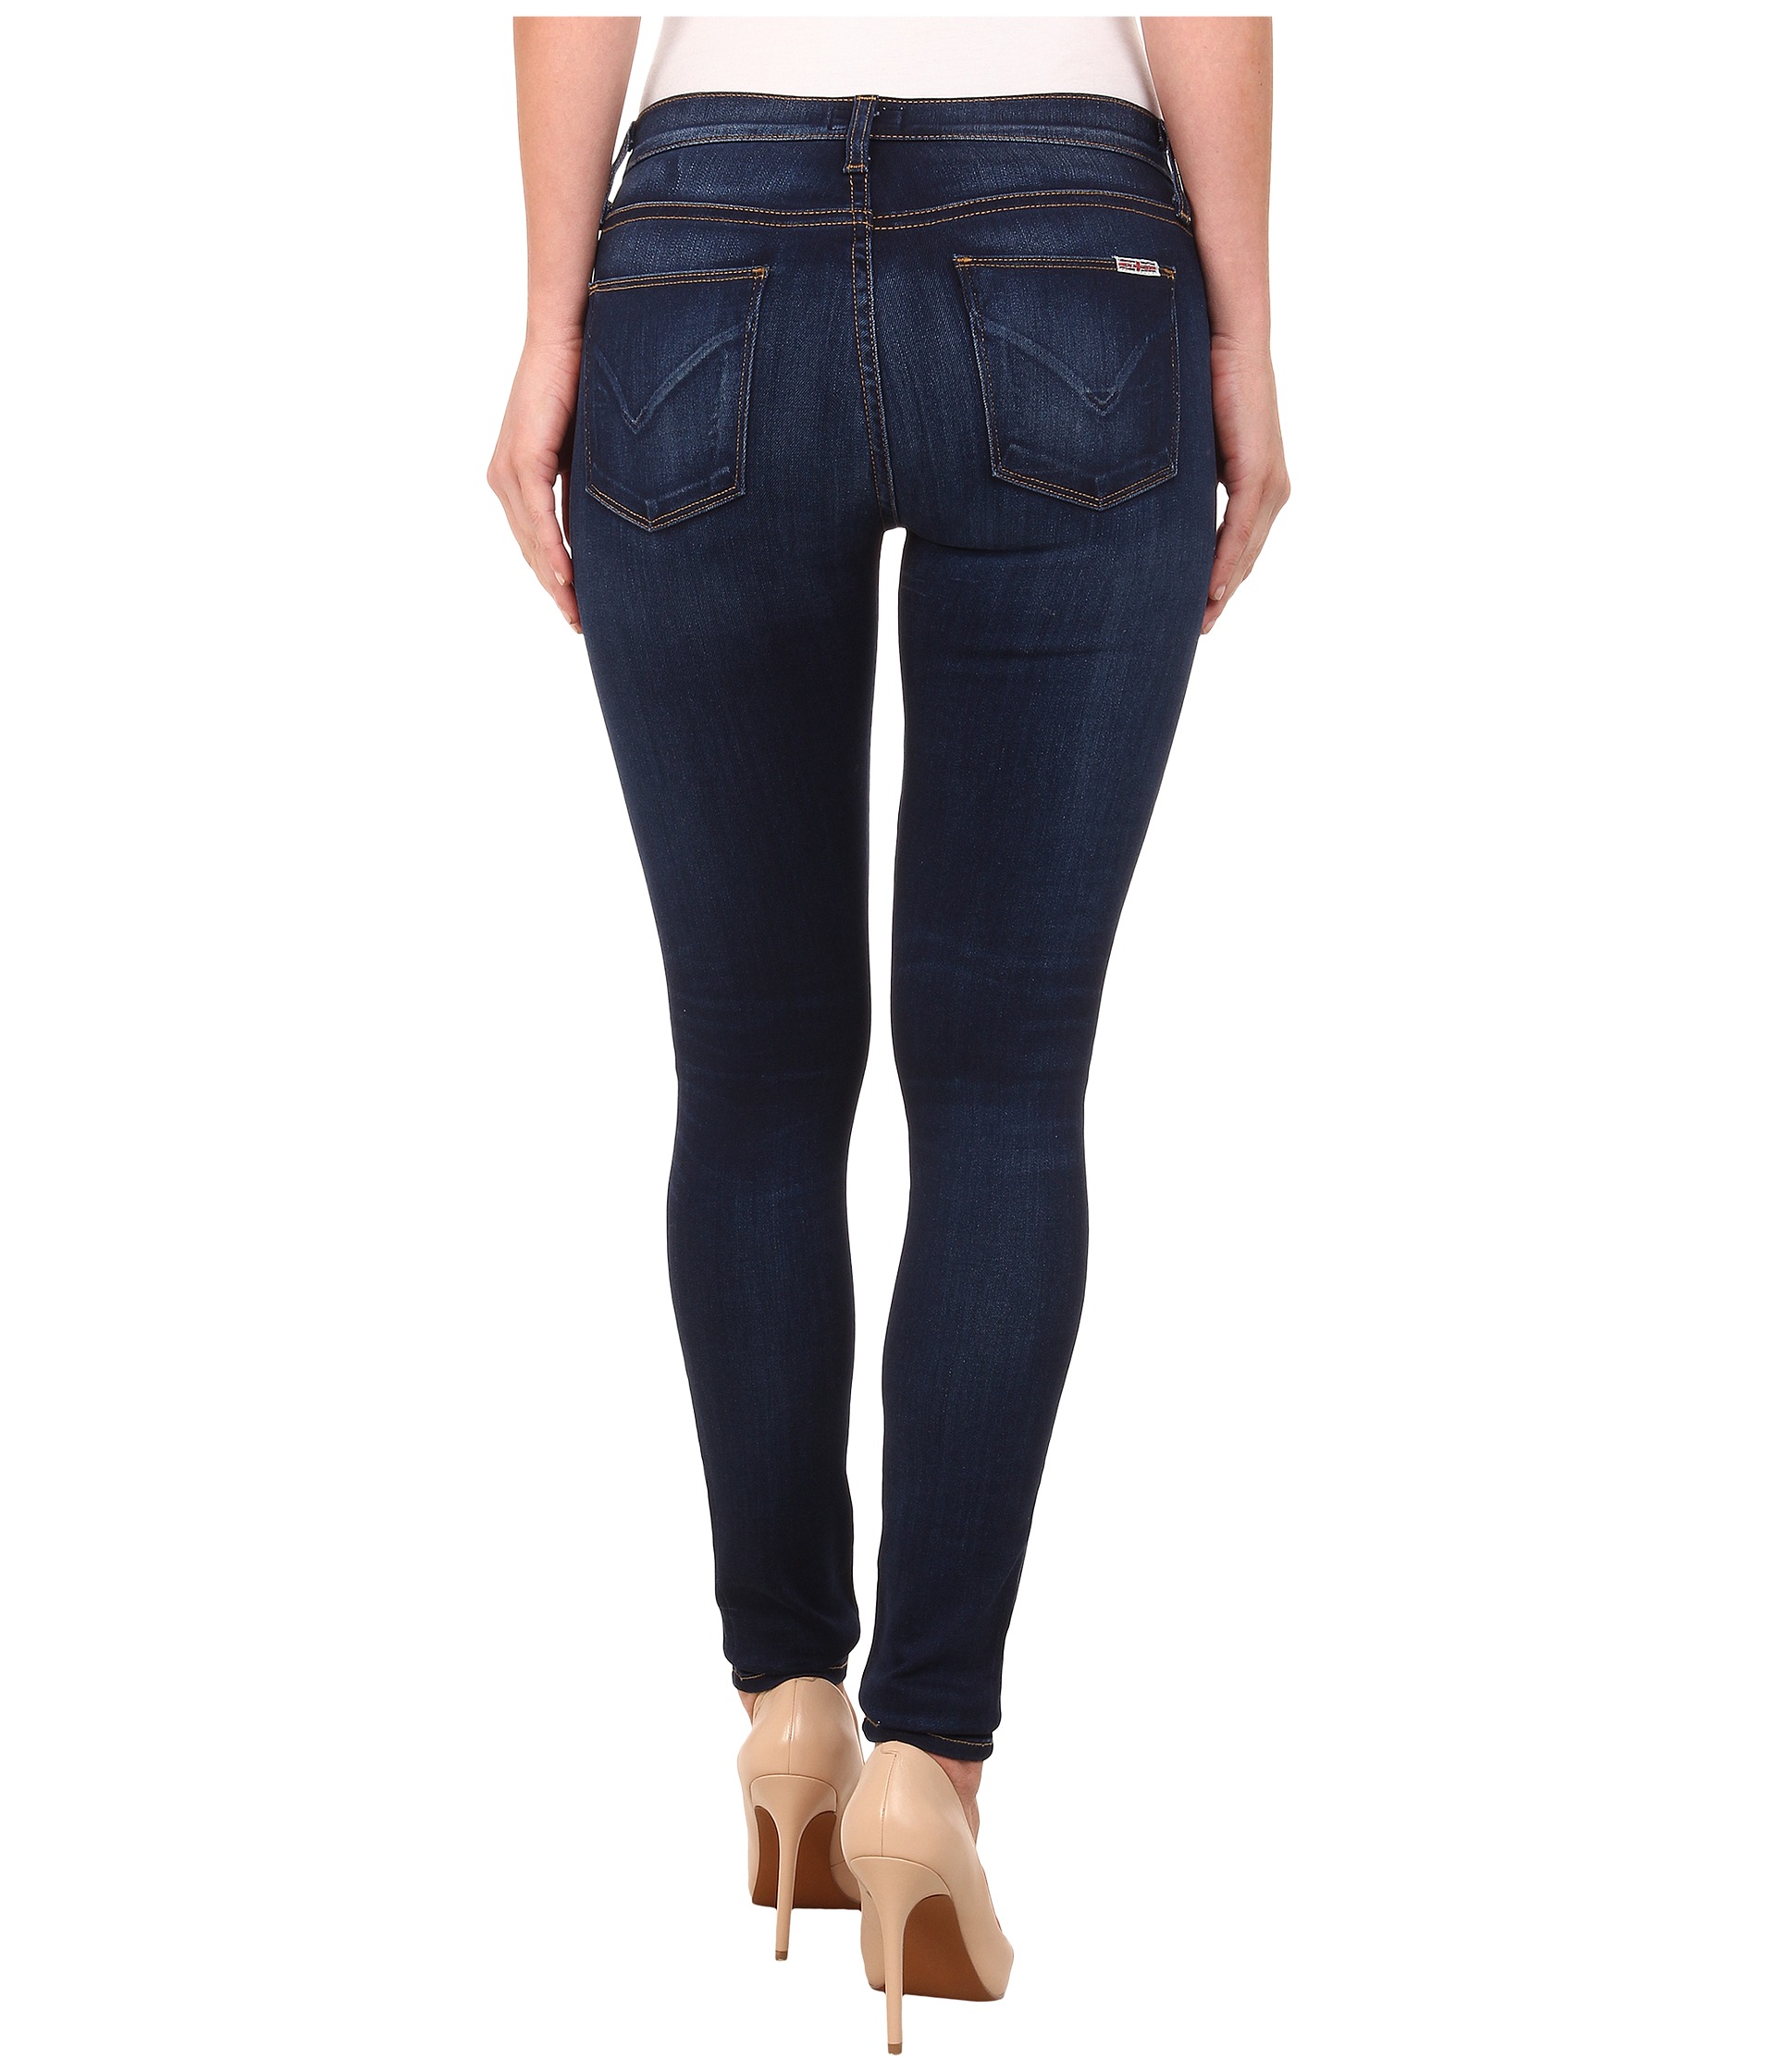 Hudson Nico Mid Rise Super Skinny Jeans in Revelation at Zappos.com